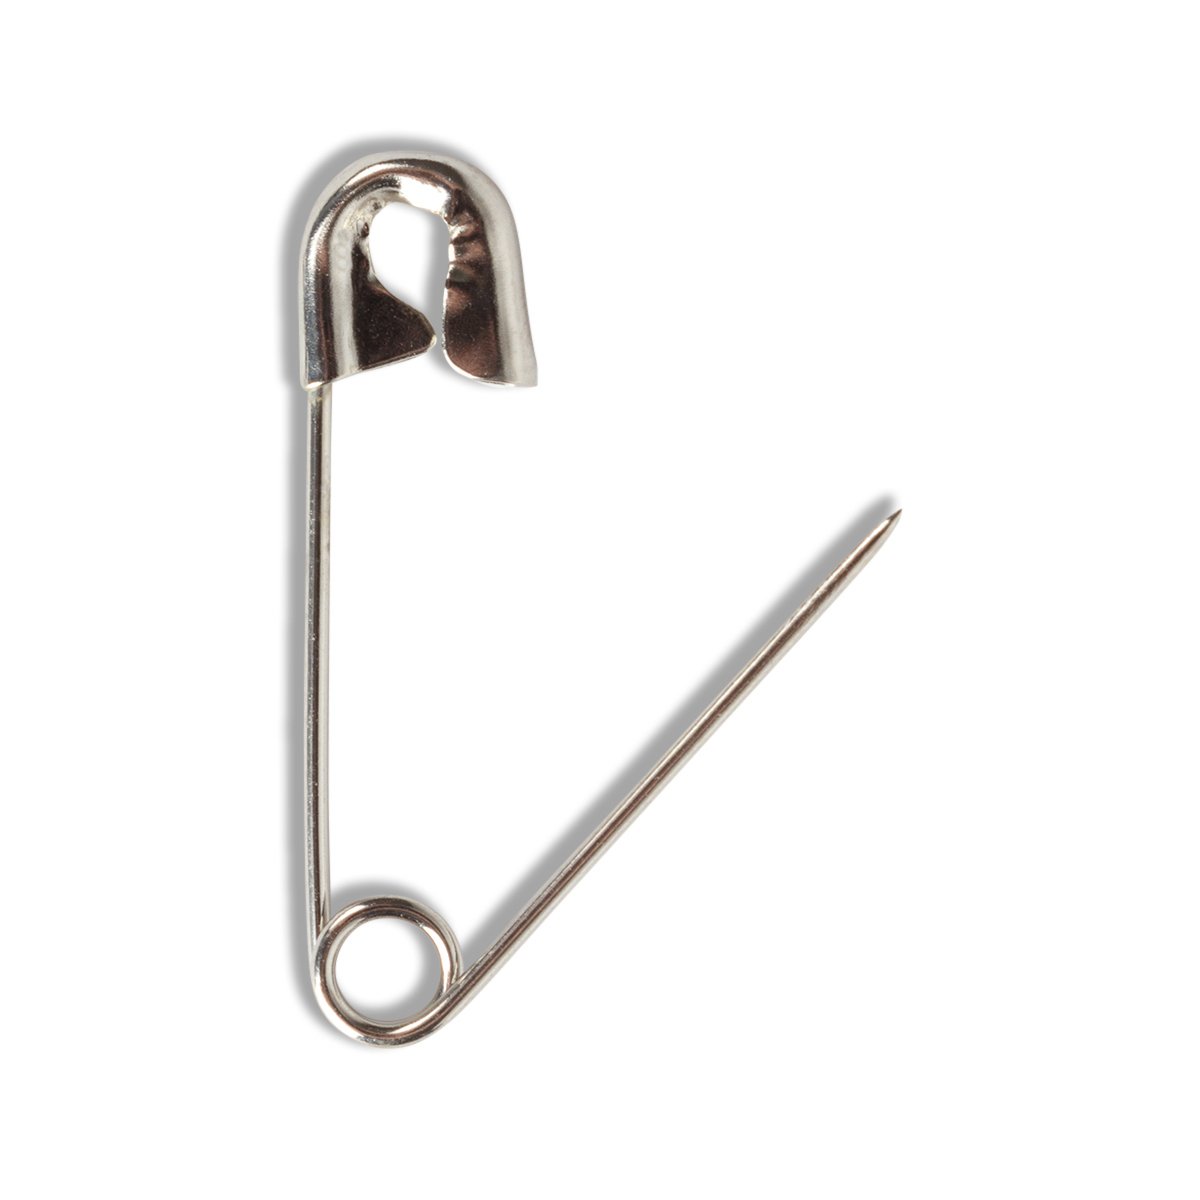 Supreme Safety Pins 1.5 inch. Item, X-2-SC #2 Closed Pin (1440